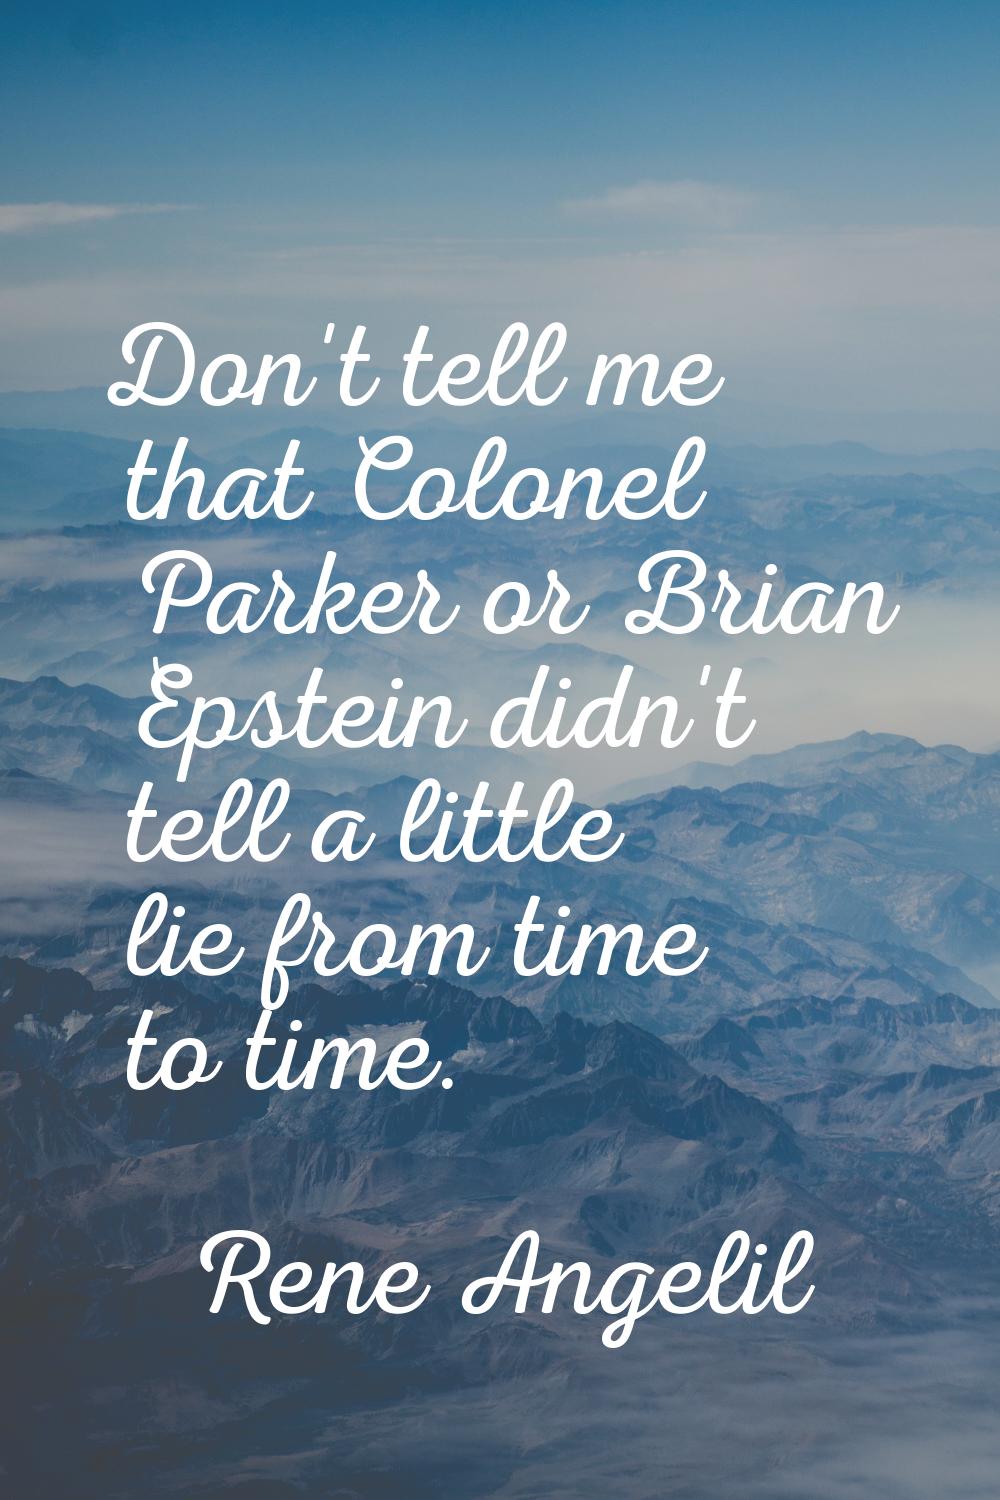 Don't tell me that Colonel Parker or Brian Epstein didn't tell a little lie from time to time.